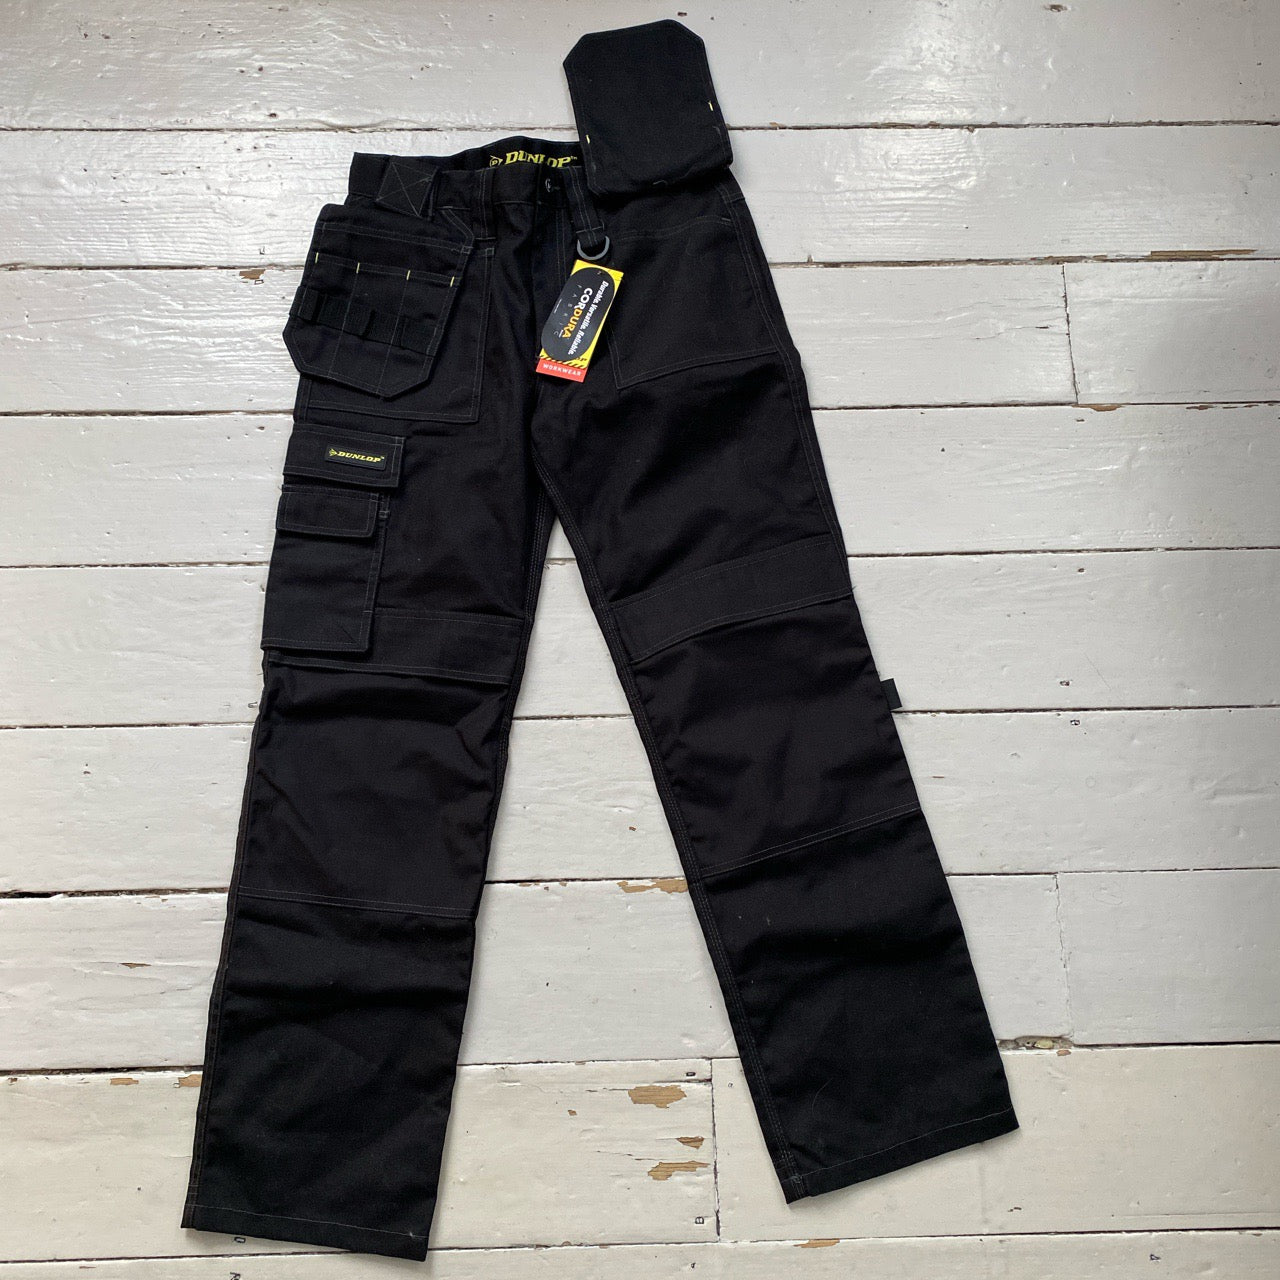 PW301 Cotton Work Trousers - Workwear-OnLine